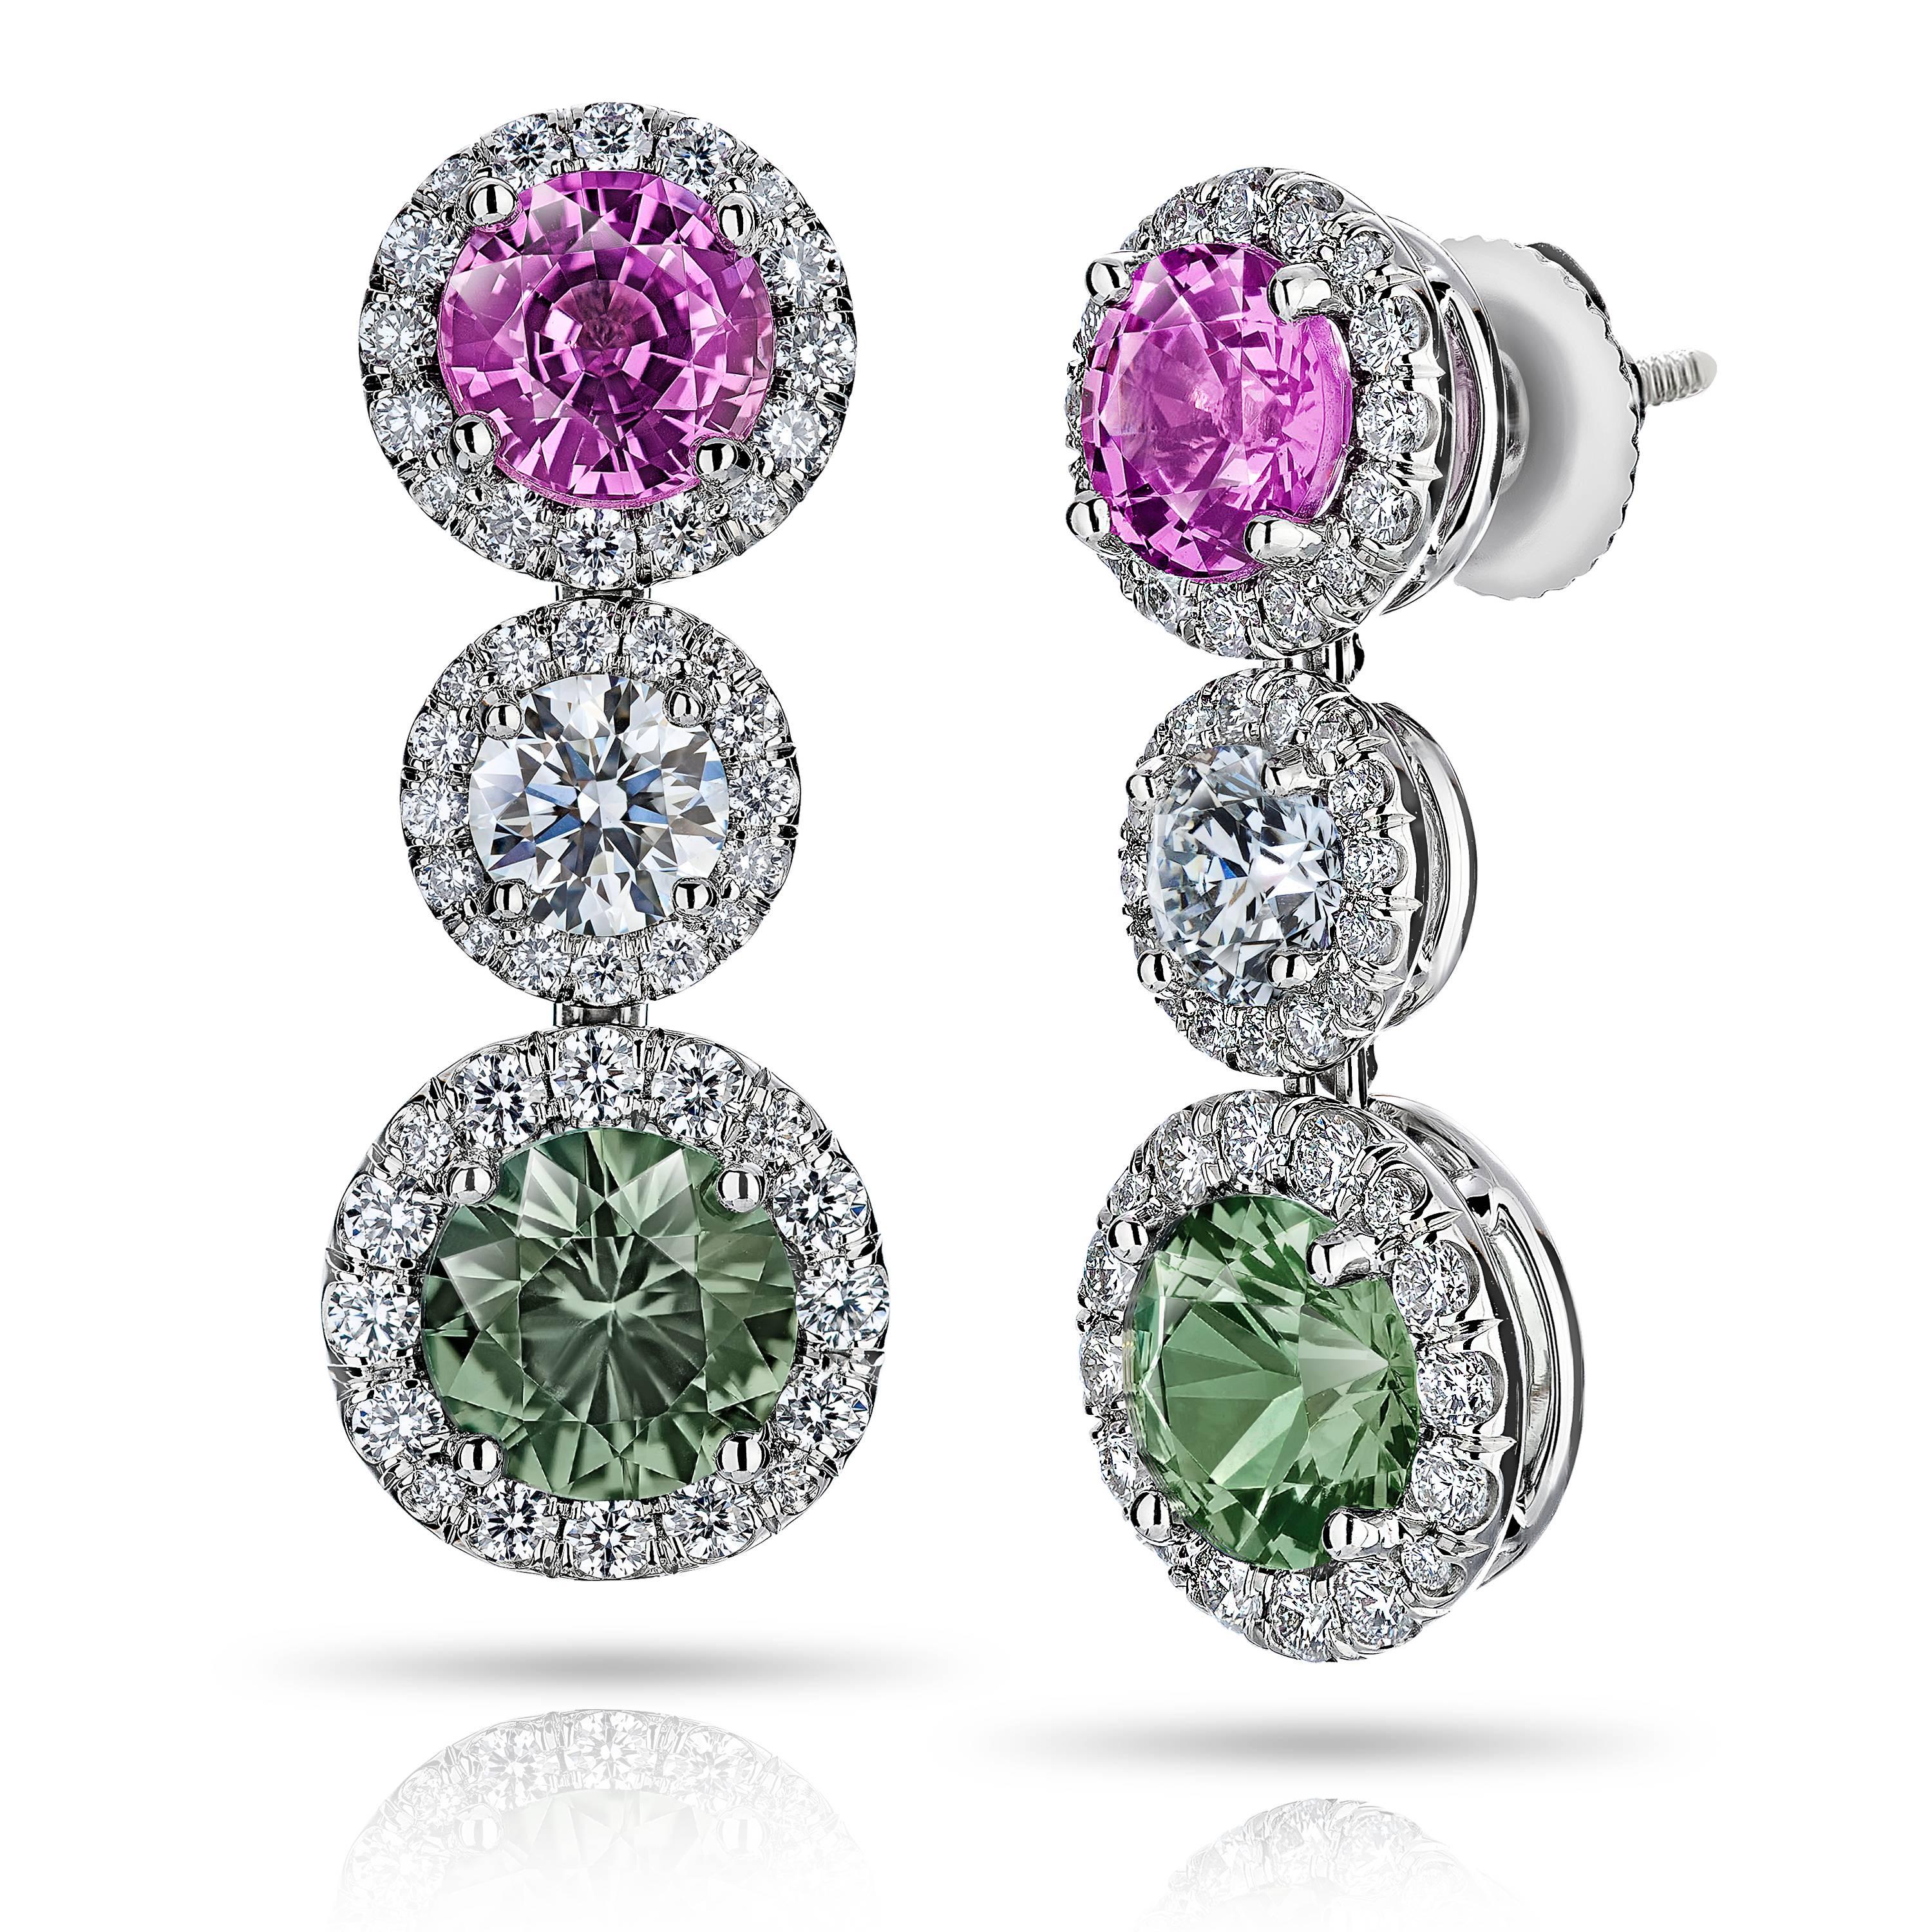 Green and Pink Sapphire and Diamond Drop Earrings, with a total green sapphire weight of 2.35 carats and 1.98 carats of the pink sapphires plus 2 round Diamonds .67 carats (GIA E /VS)  and 96 brilliant cut diamonds weighing .93 carats set in